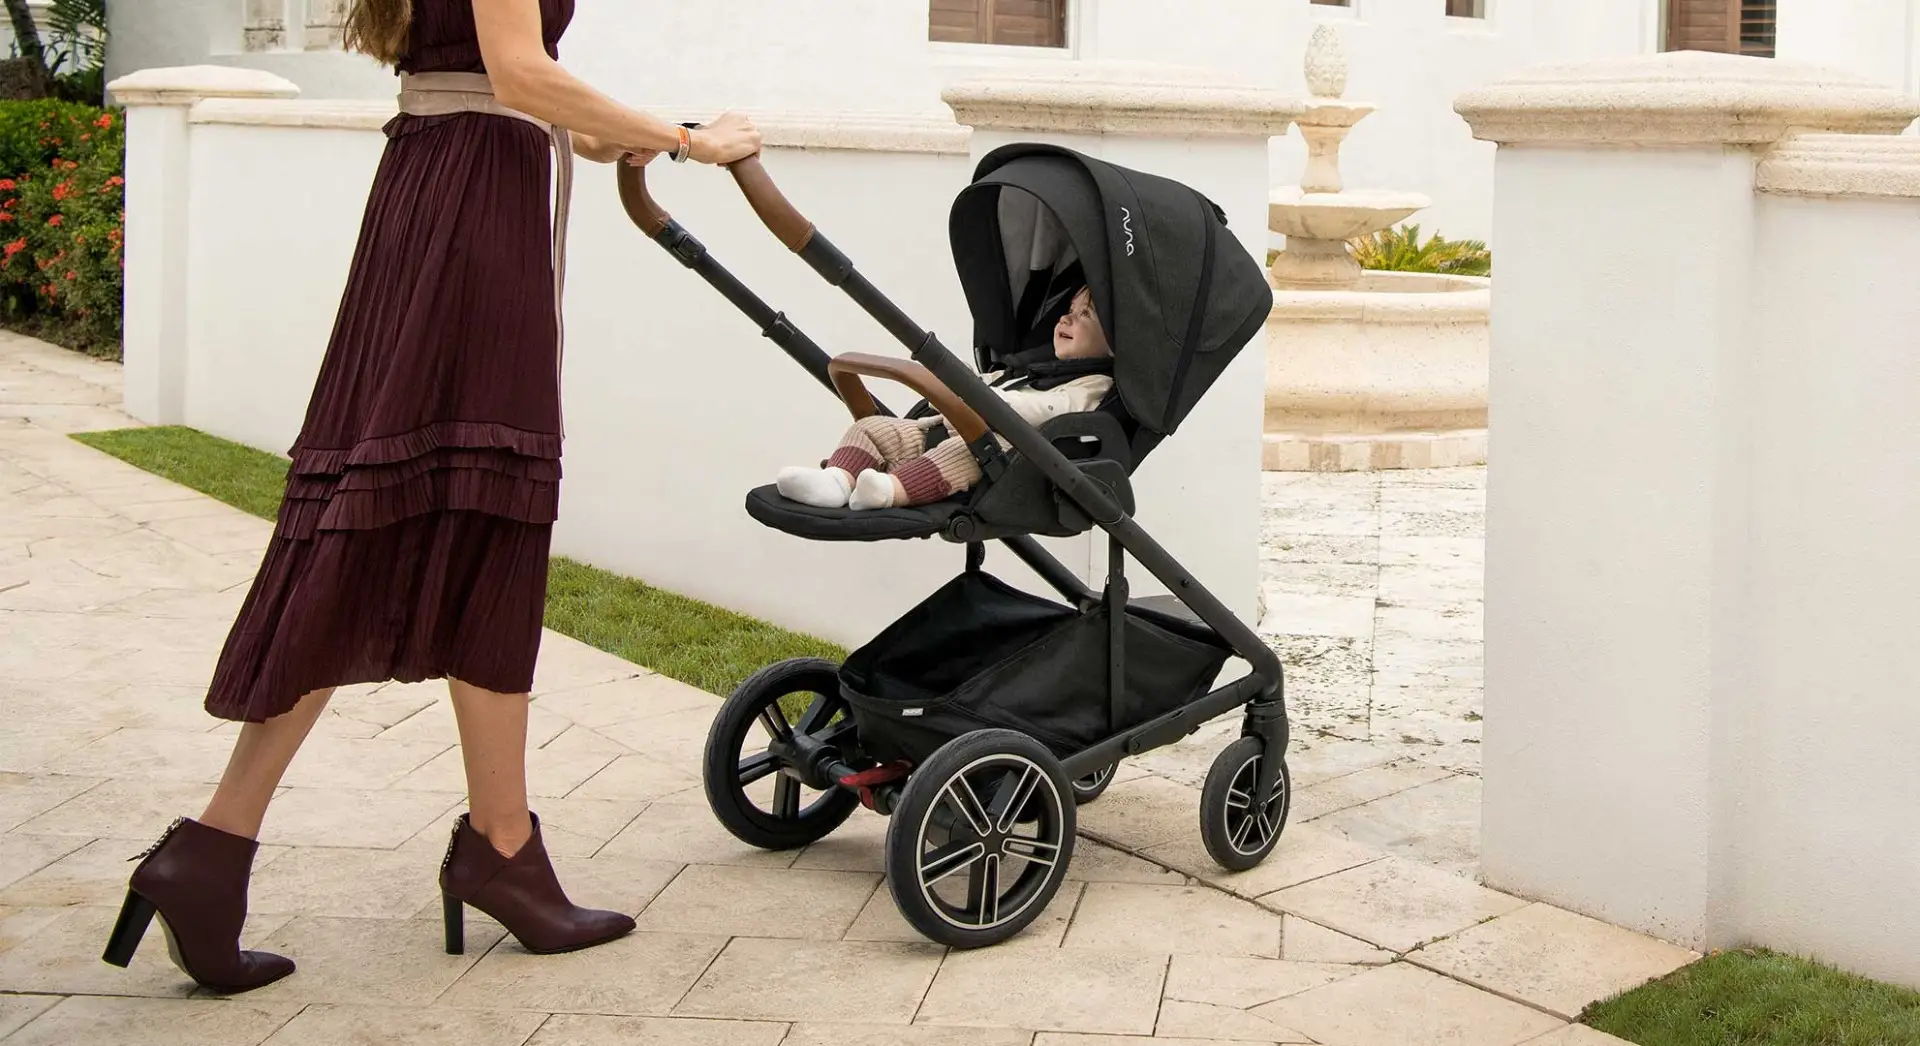 Nuna Pipa Car Seat And Nuna Mixx Stroller Review: Your Baby Will Thank You!